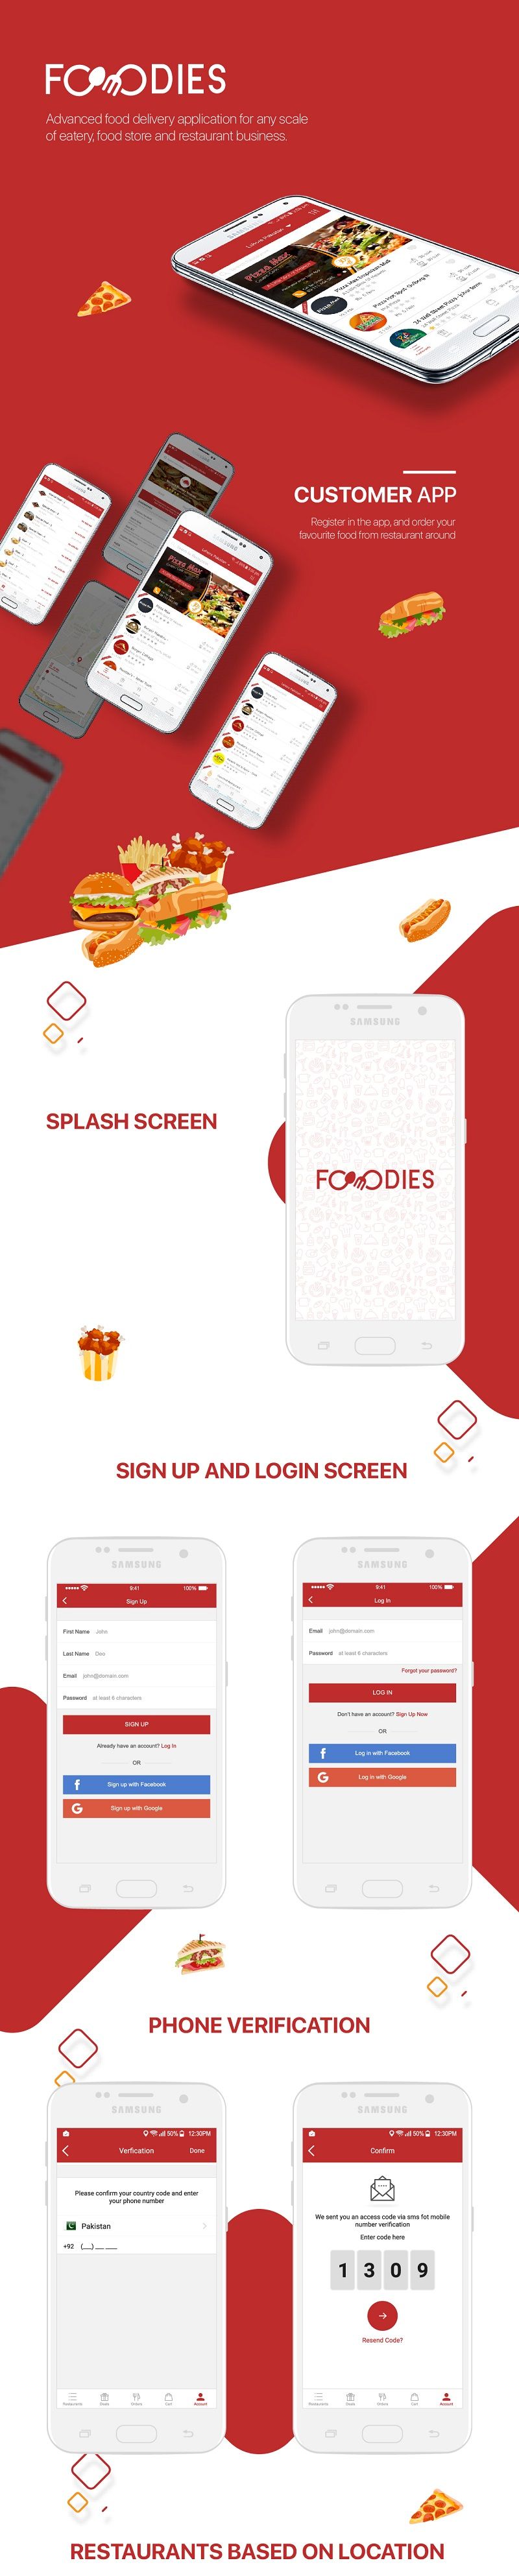 Native Restaurant Food Delivery & Ordering System With Delivery Boy - Android v2.0.9 - 12